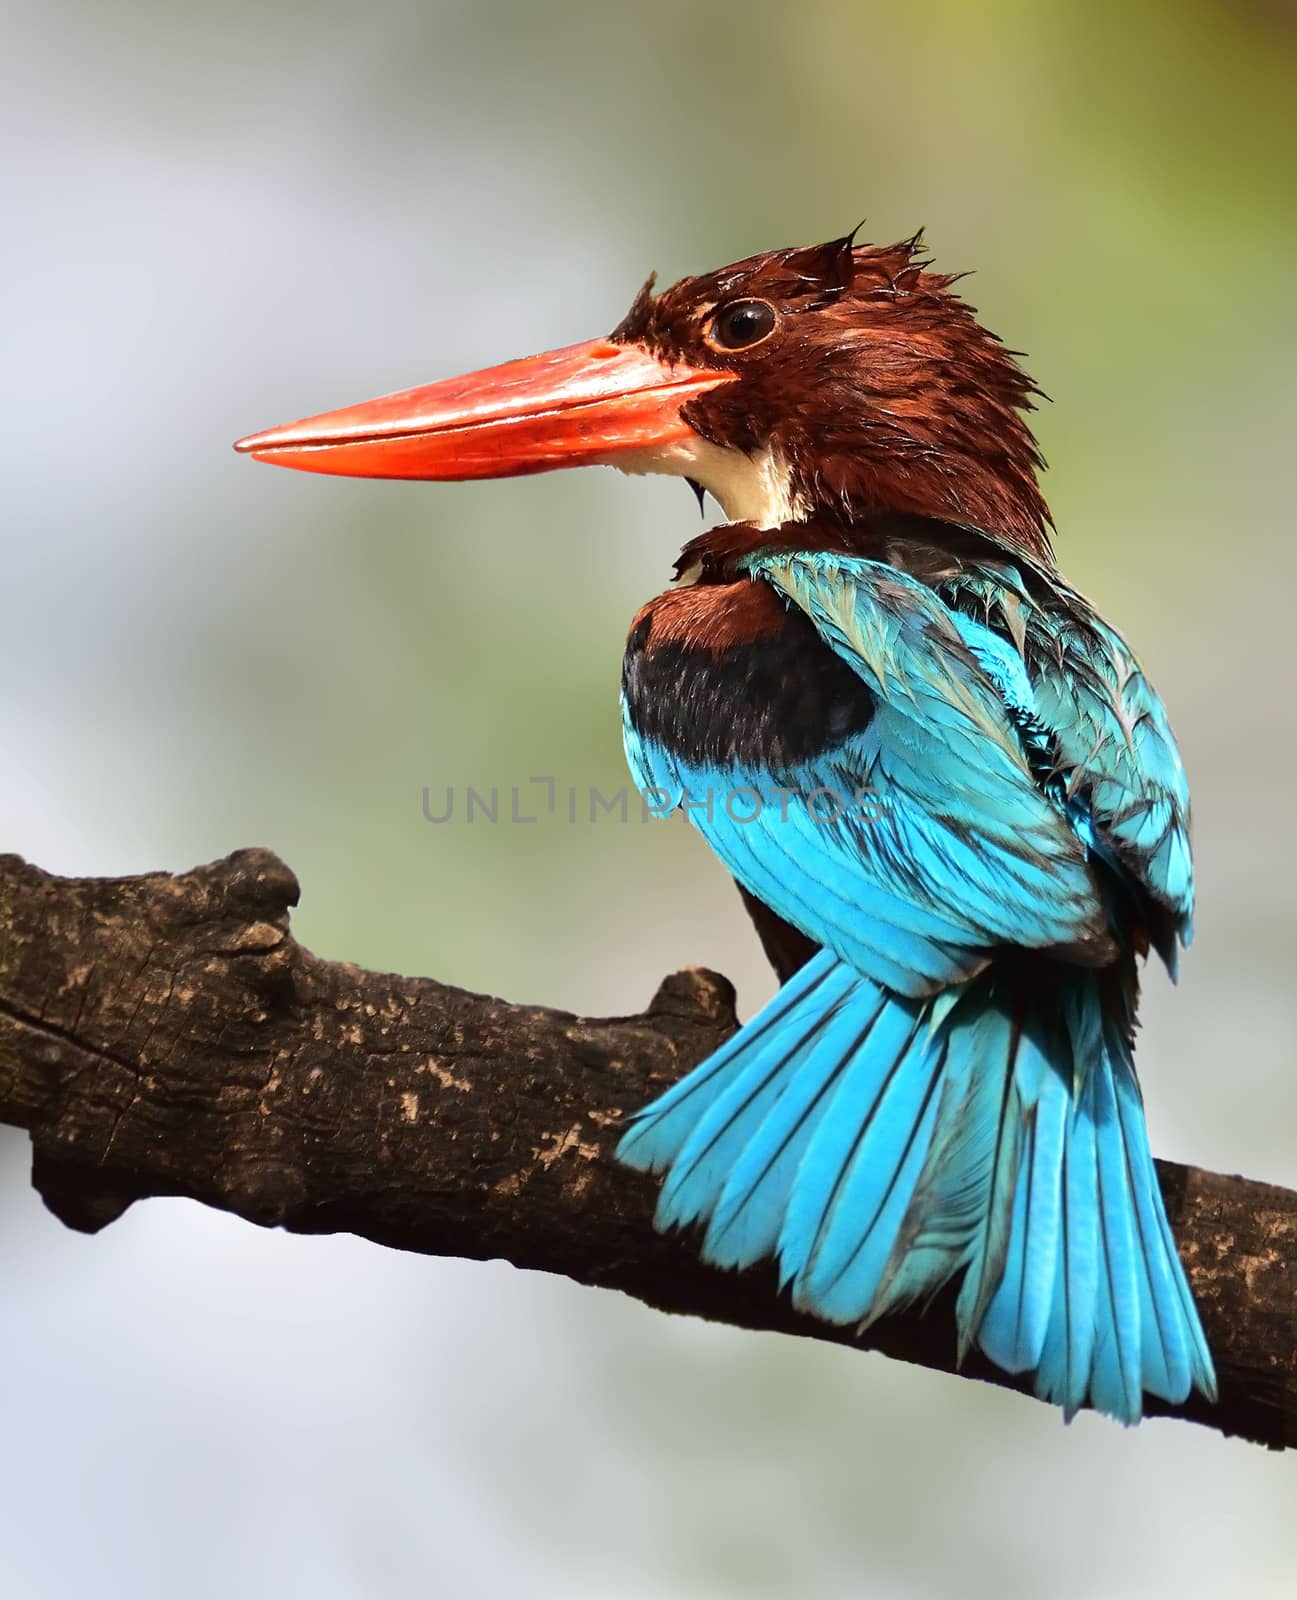 The white-throated kingfisher also known as the white-breasted kingfisher is a tree kingfisher, widely distributed in Asia.